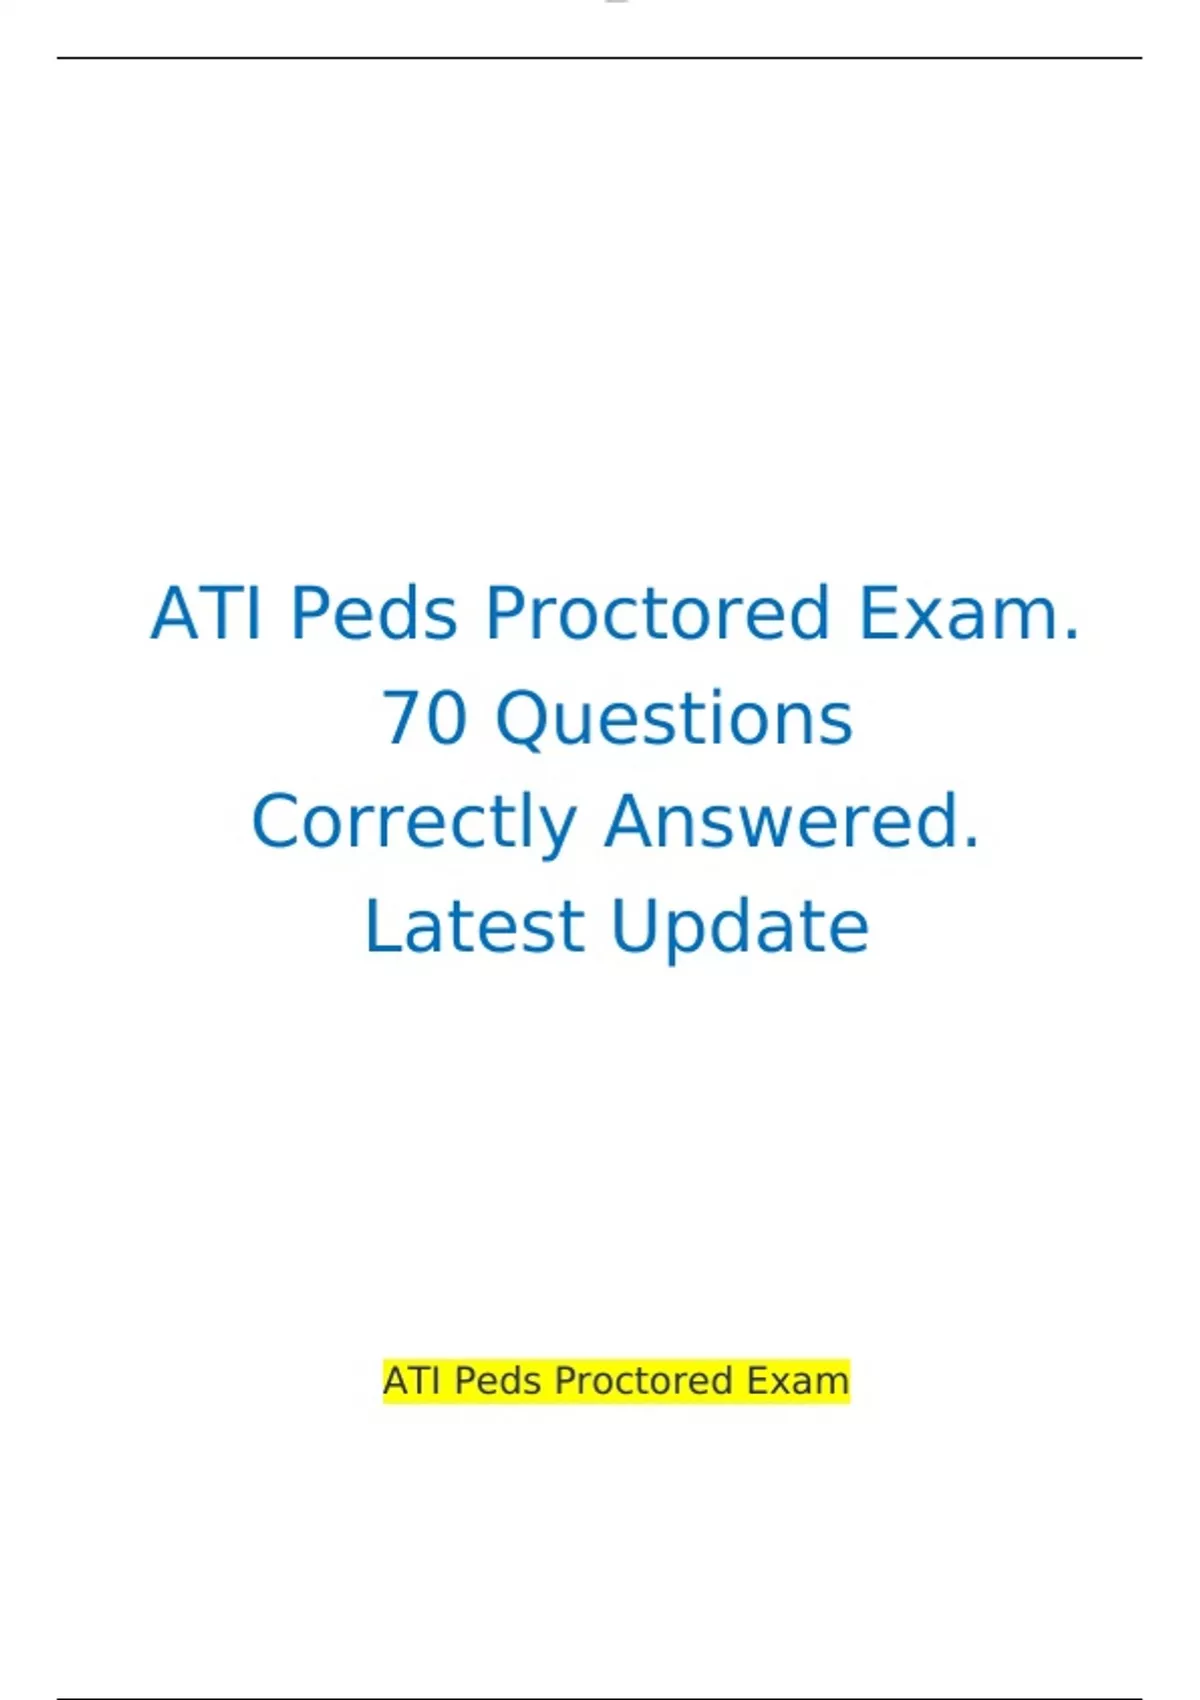 ATI Peds Proctored Exam. 70 Questions Correctly Answered. Latest Update